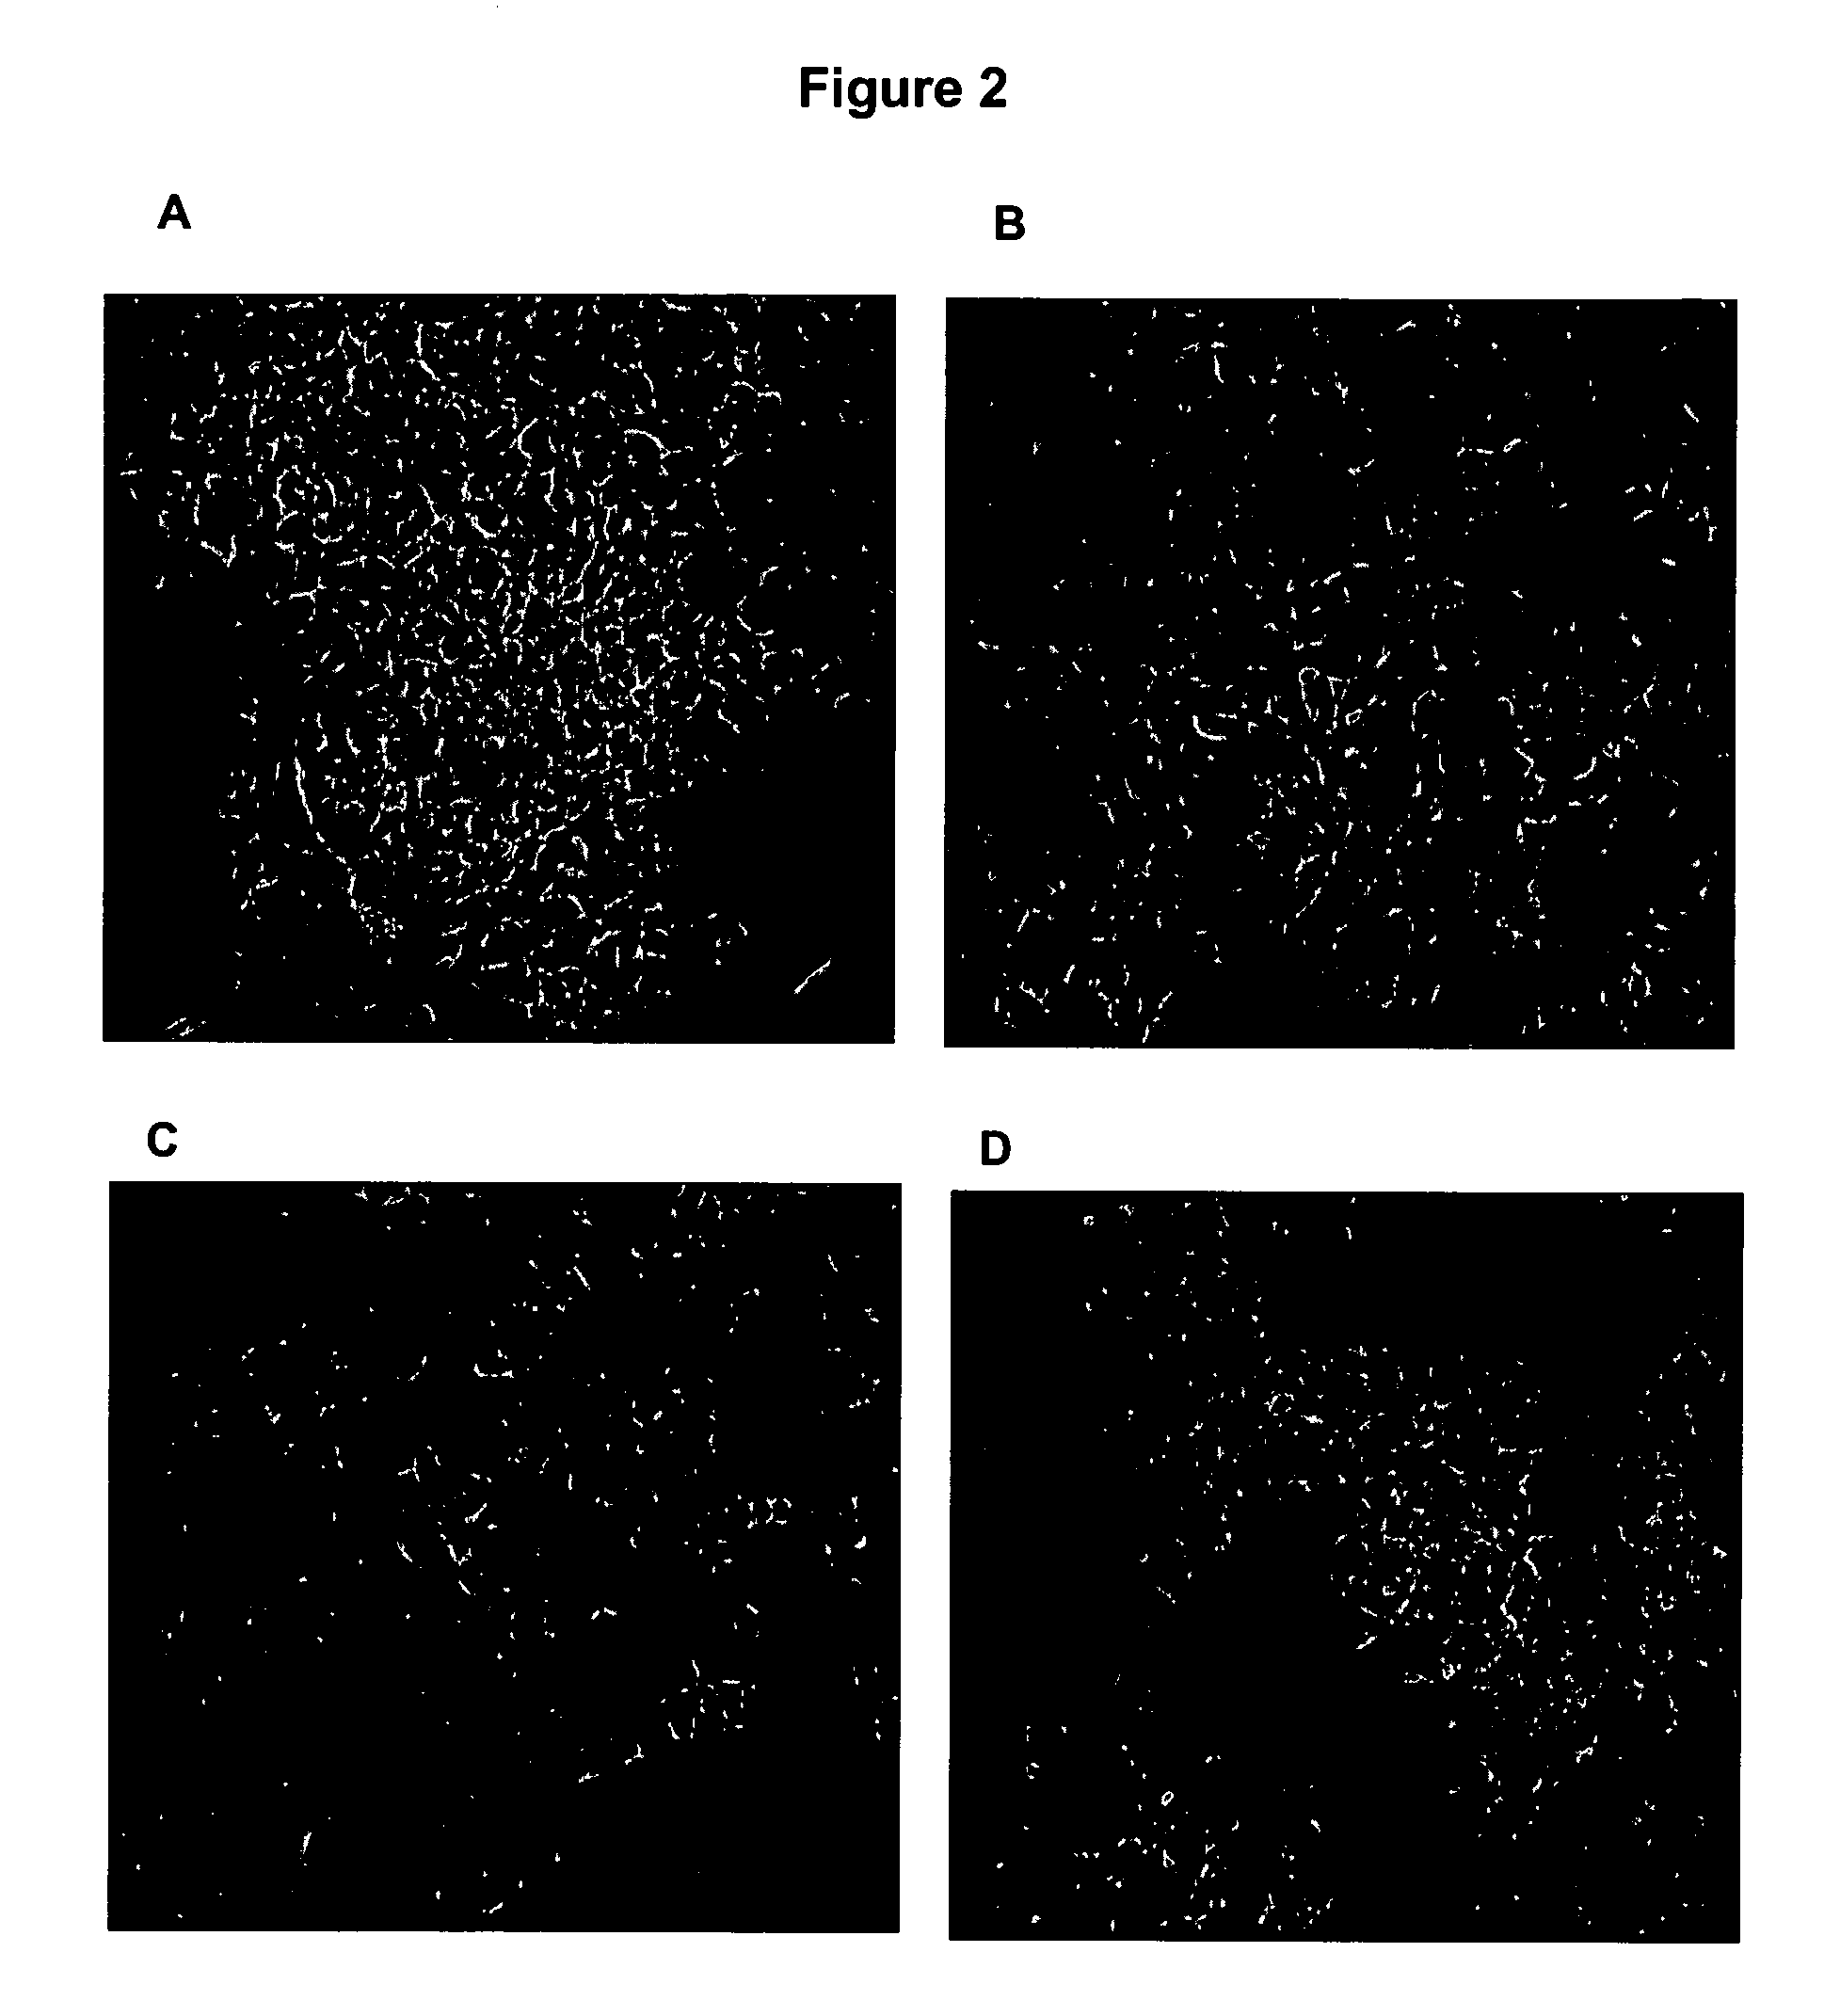 Compositions And Methods For Self-Renewal And Differentiation In Human Embryonic Stem Cells